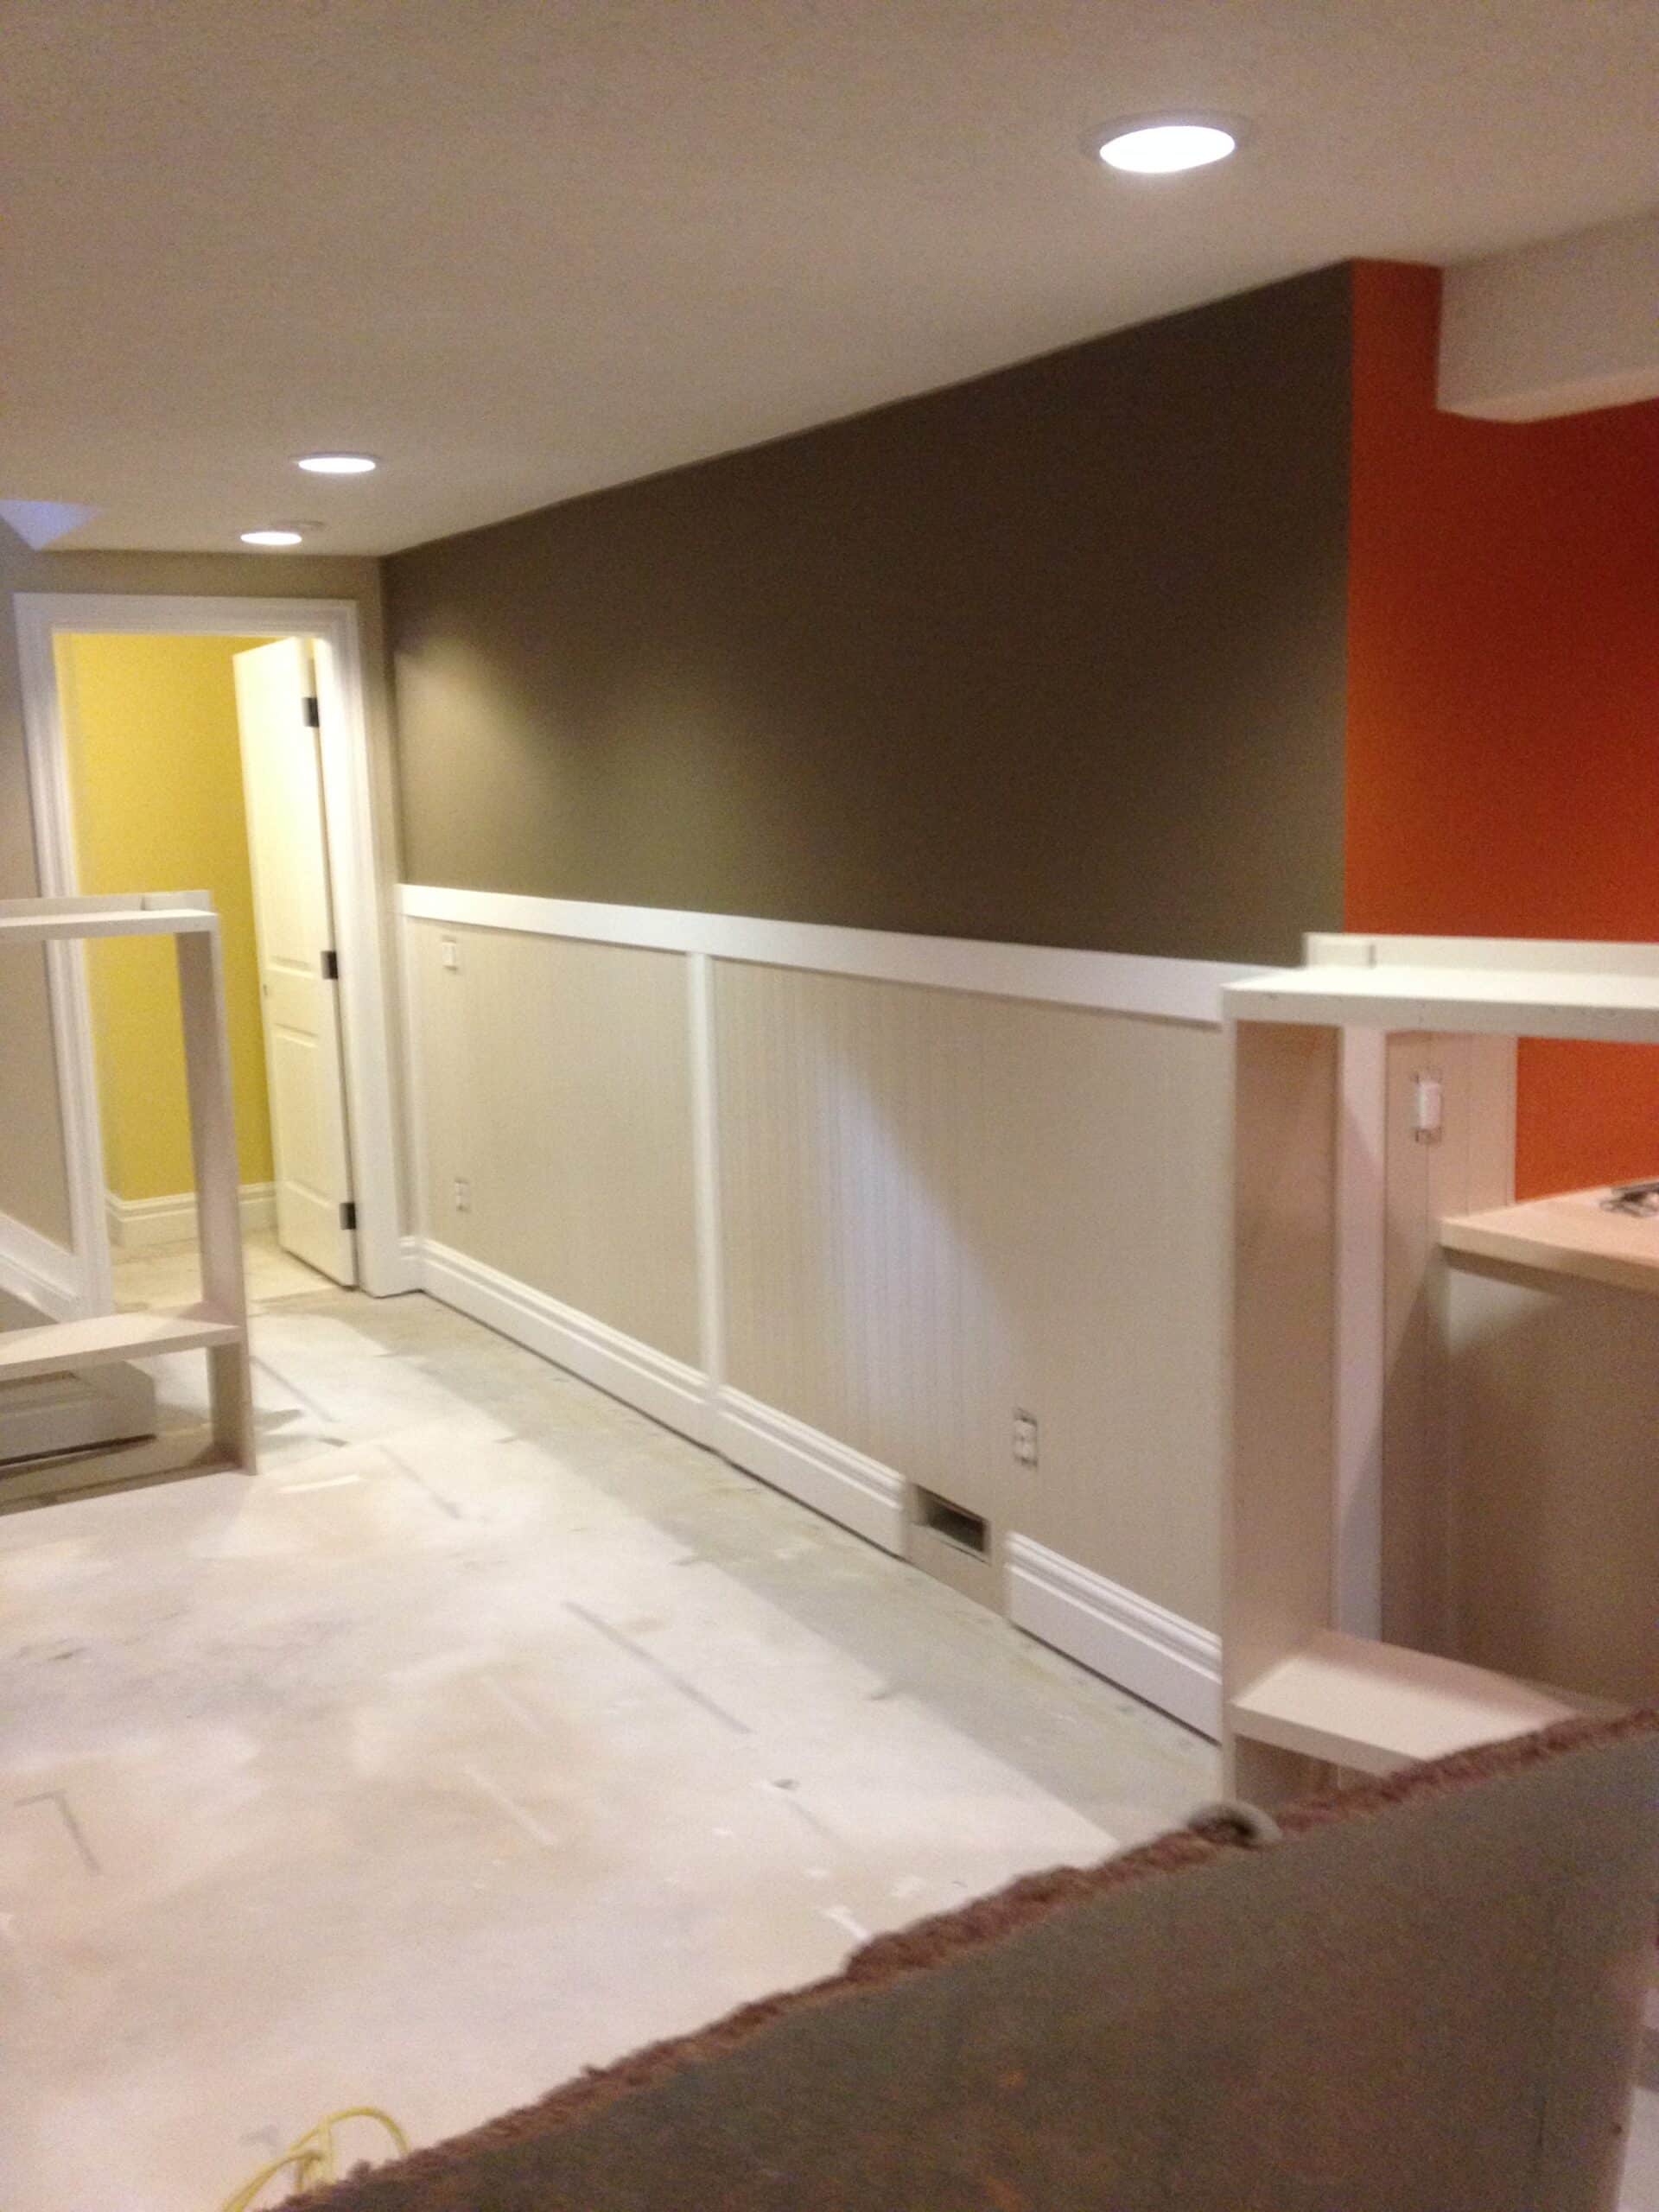 Wainscoting and walls after